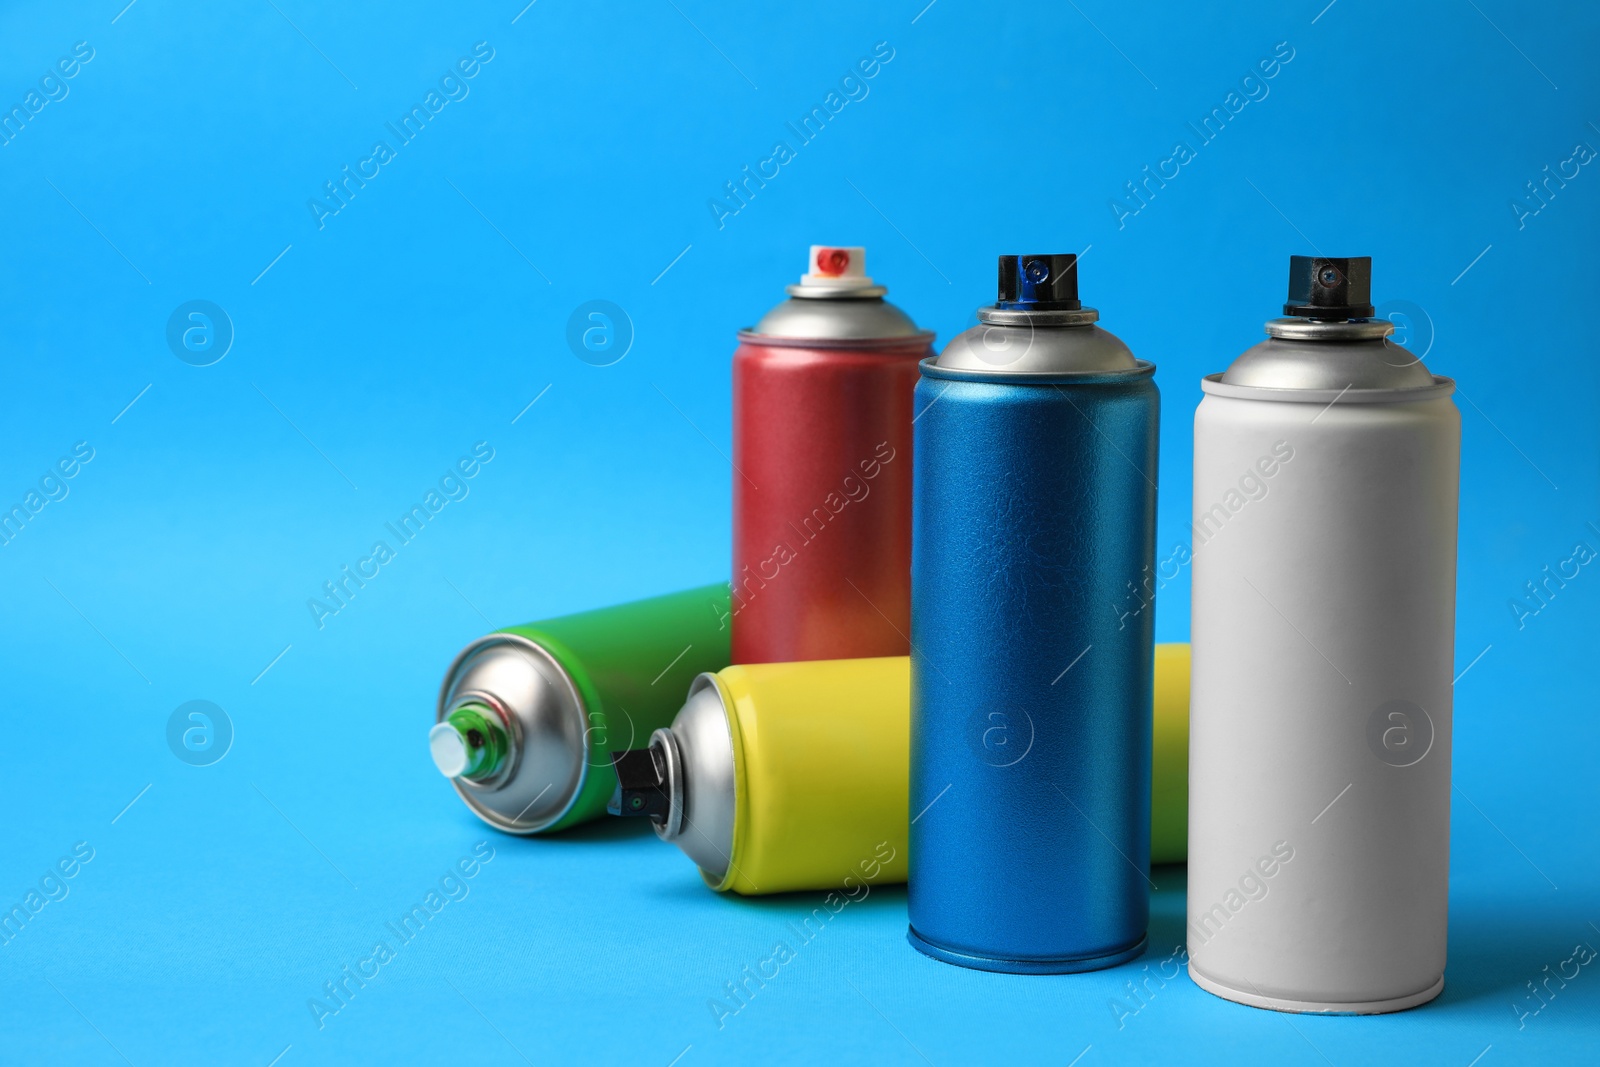 Photo of Cans of different graffiti spray paints on light blue background, space for text